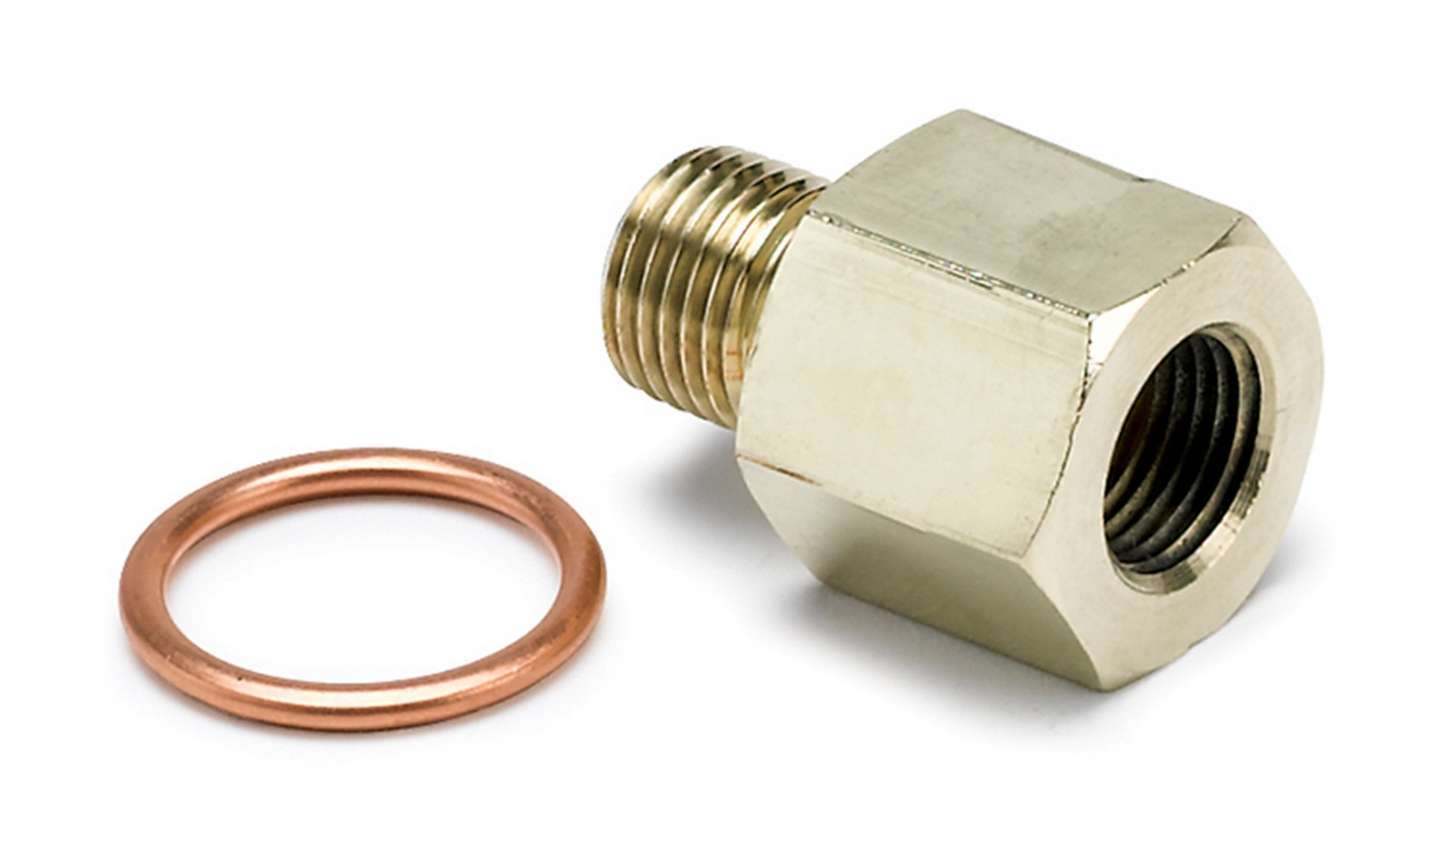 Auto Meter Fitting, Adapter, Straight, 10 mm x 1.00 Male to 1/8" NPT Female, Brass, Natural, Oil Pressure Gauges, Each